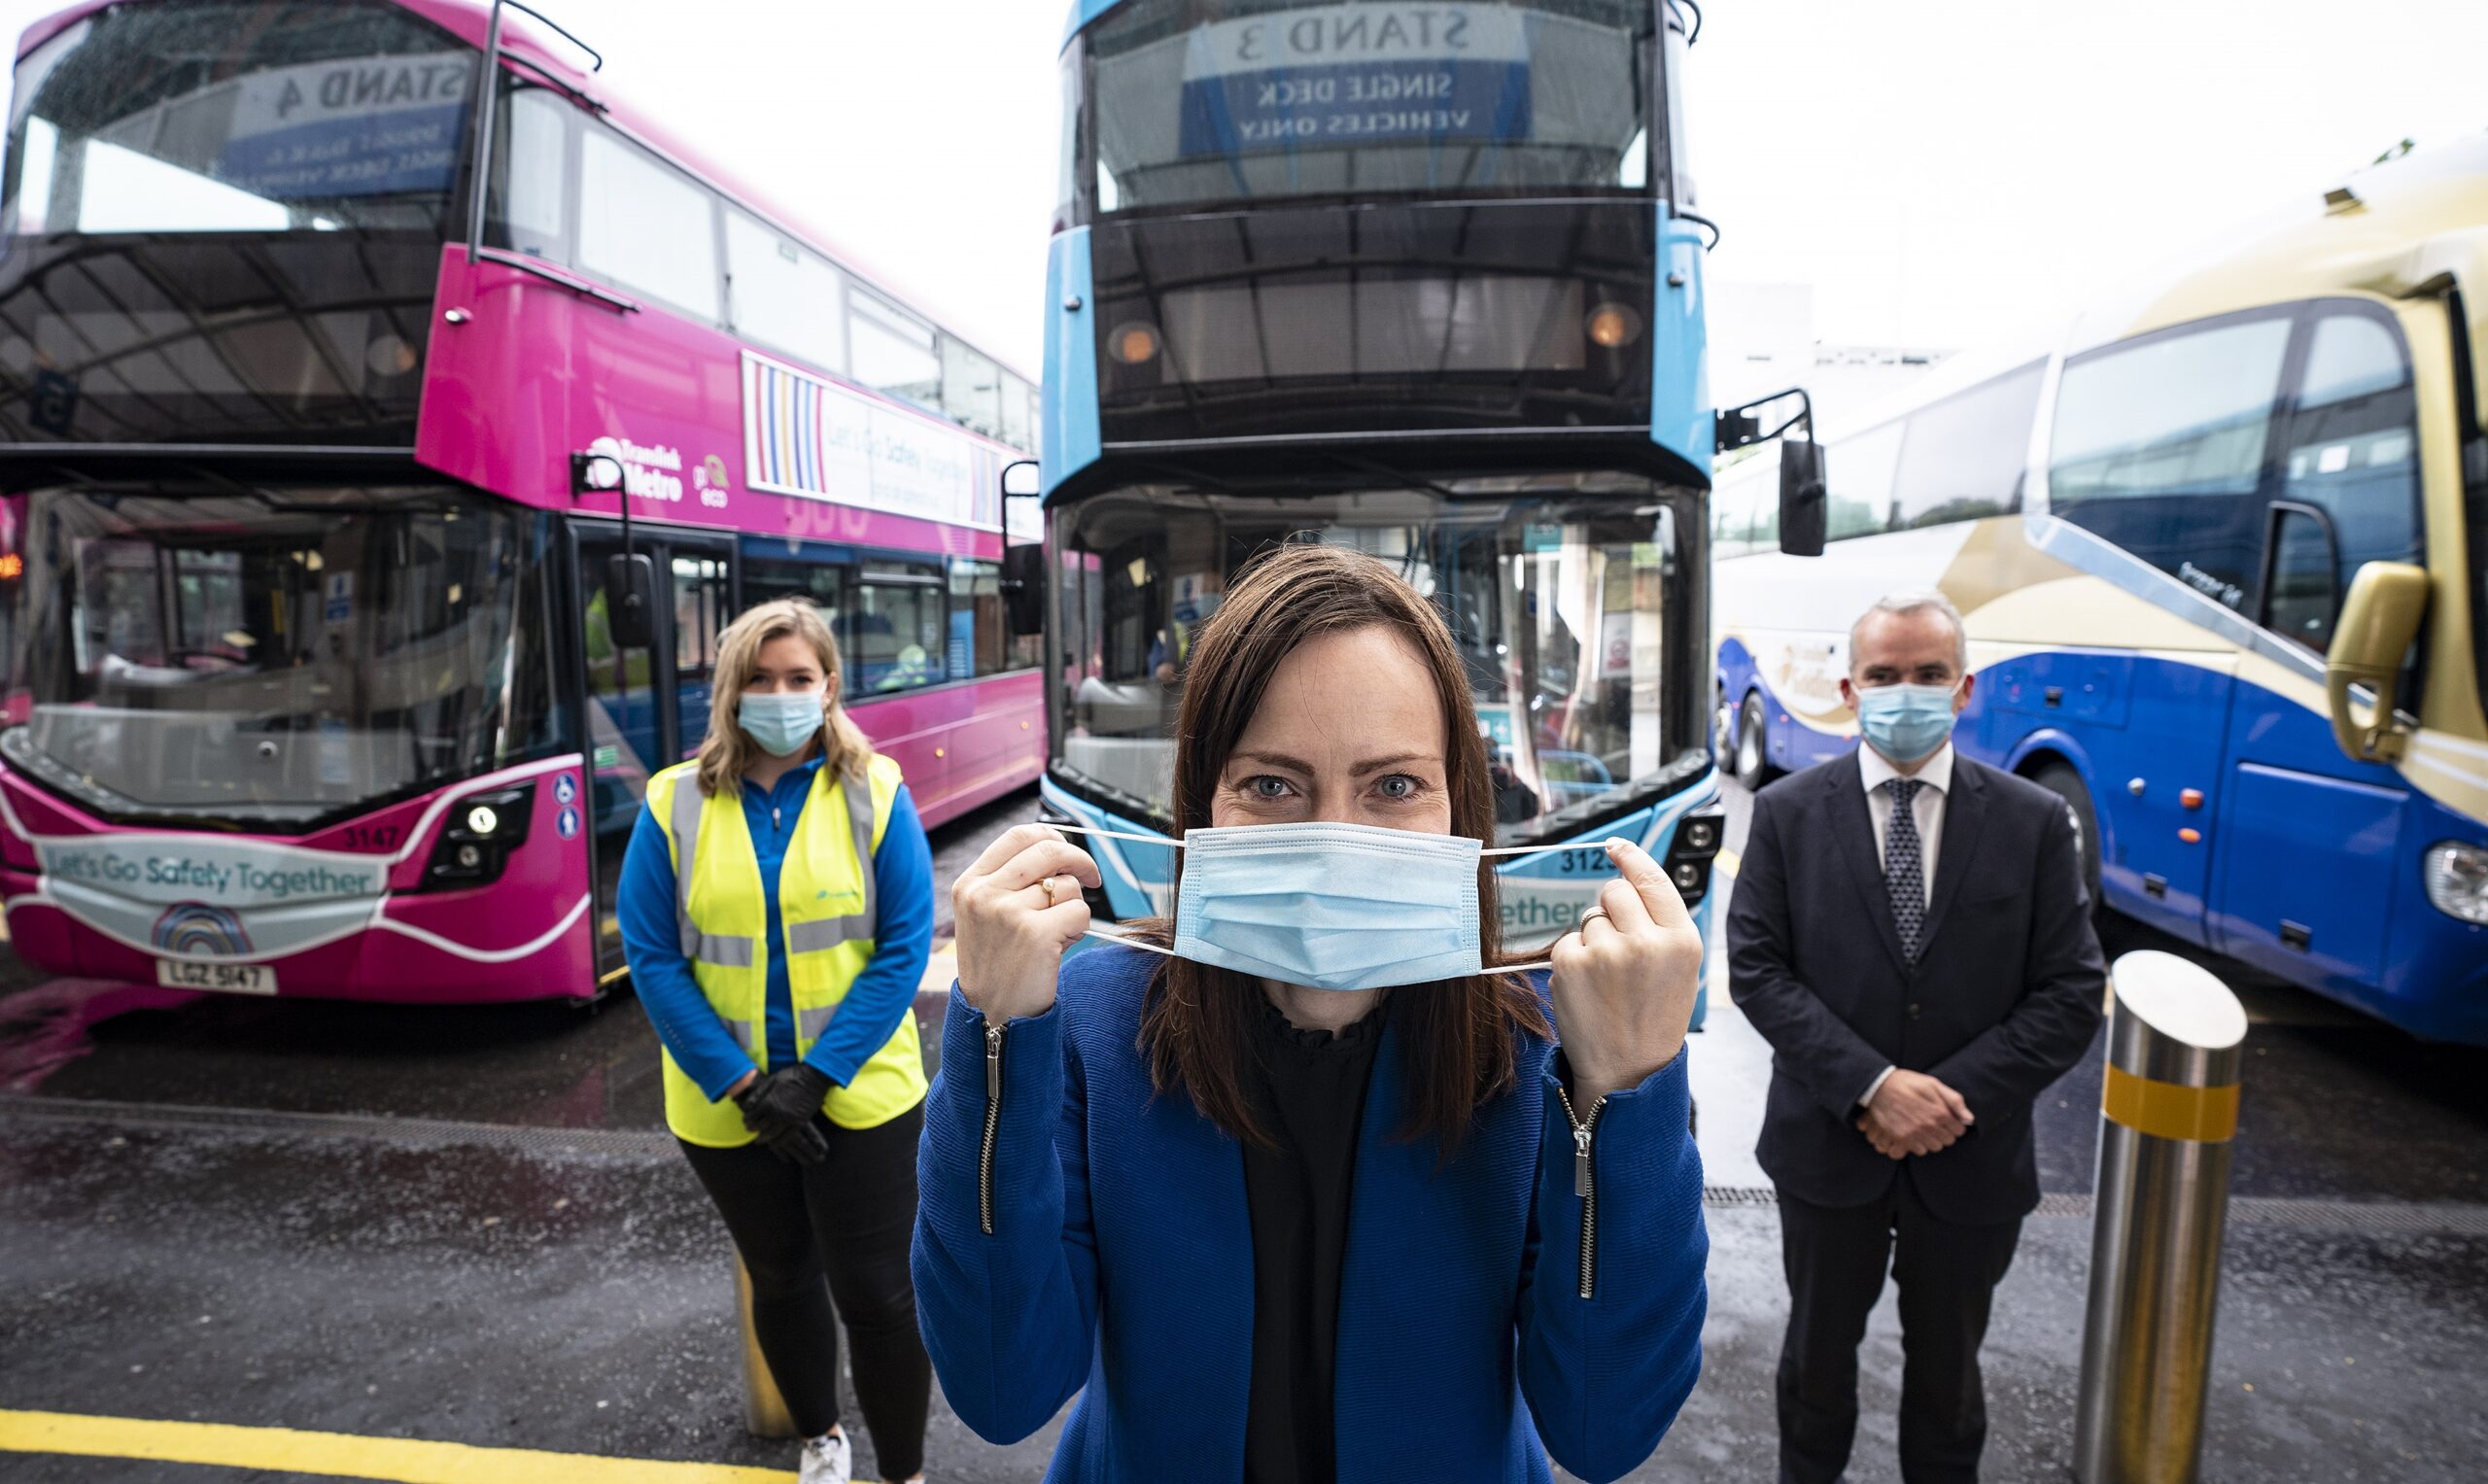 Translink-face-covering-Newry-News-Newry-Times-Breaking-news-Newry-Newry-Newspaper-Latest-News-Newry-Newry-headlines